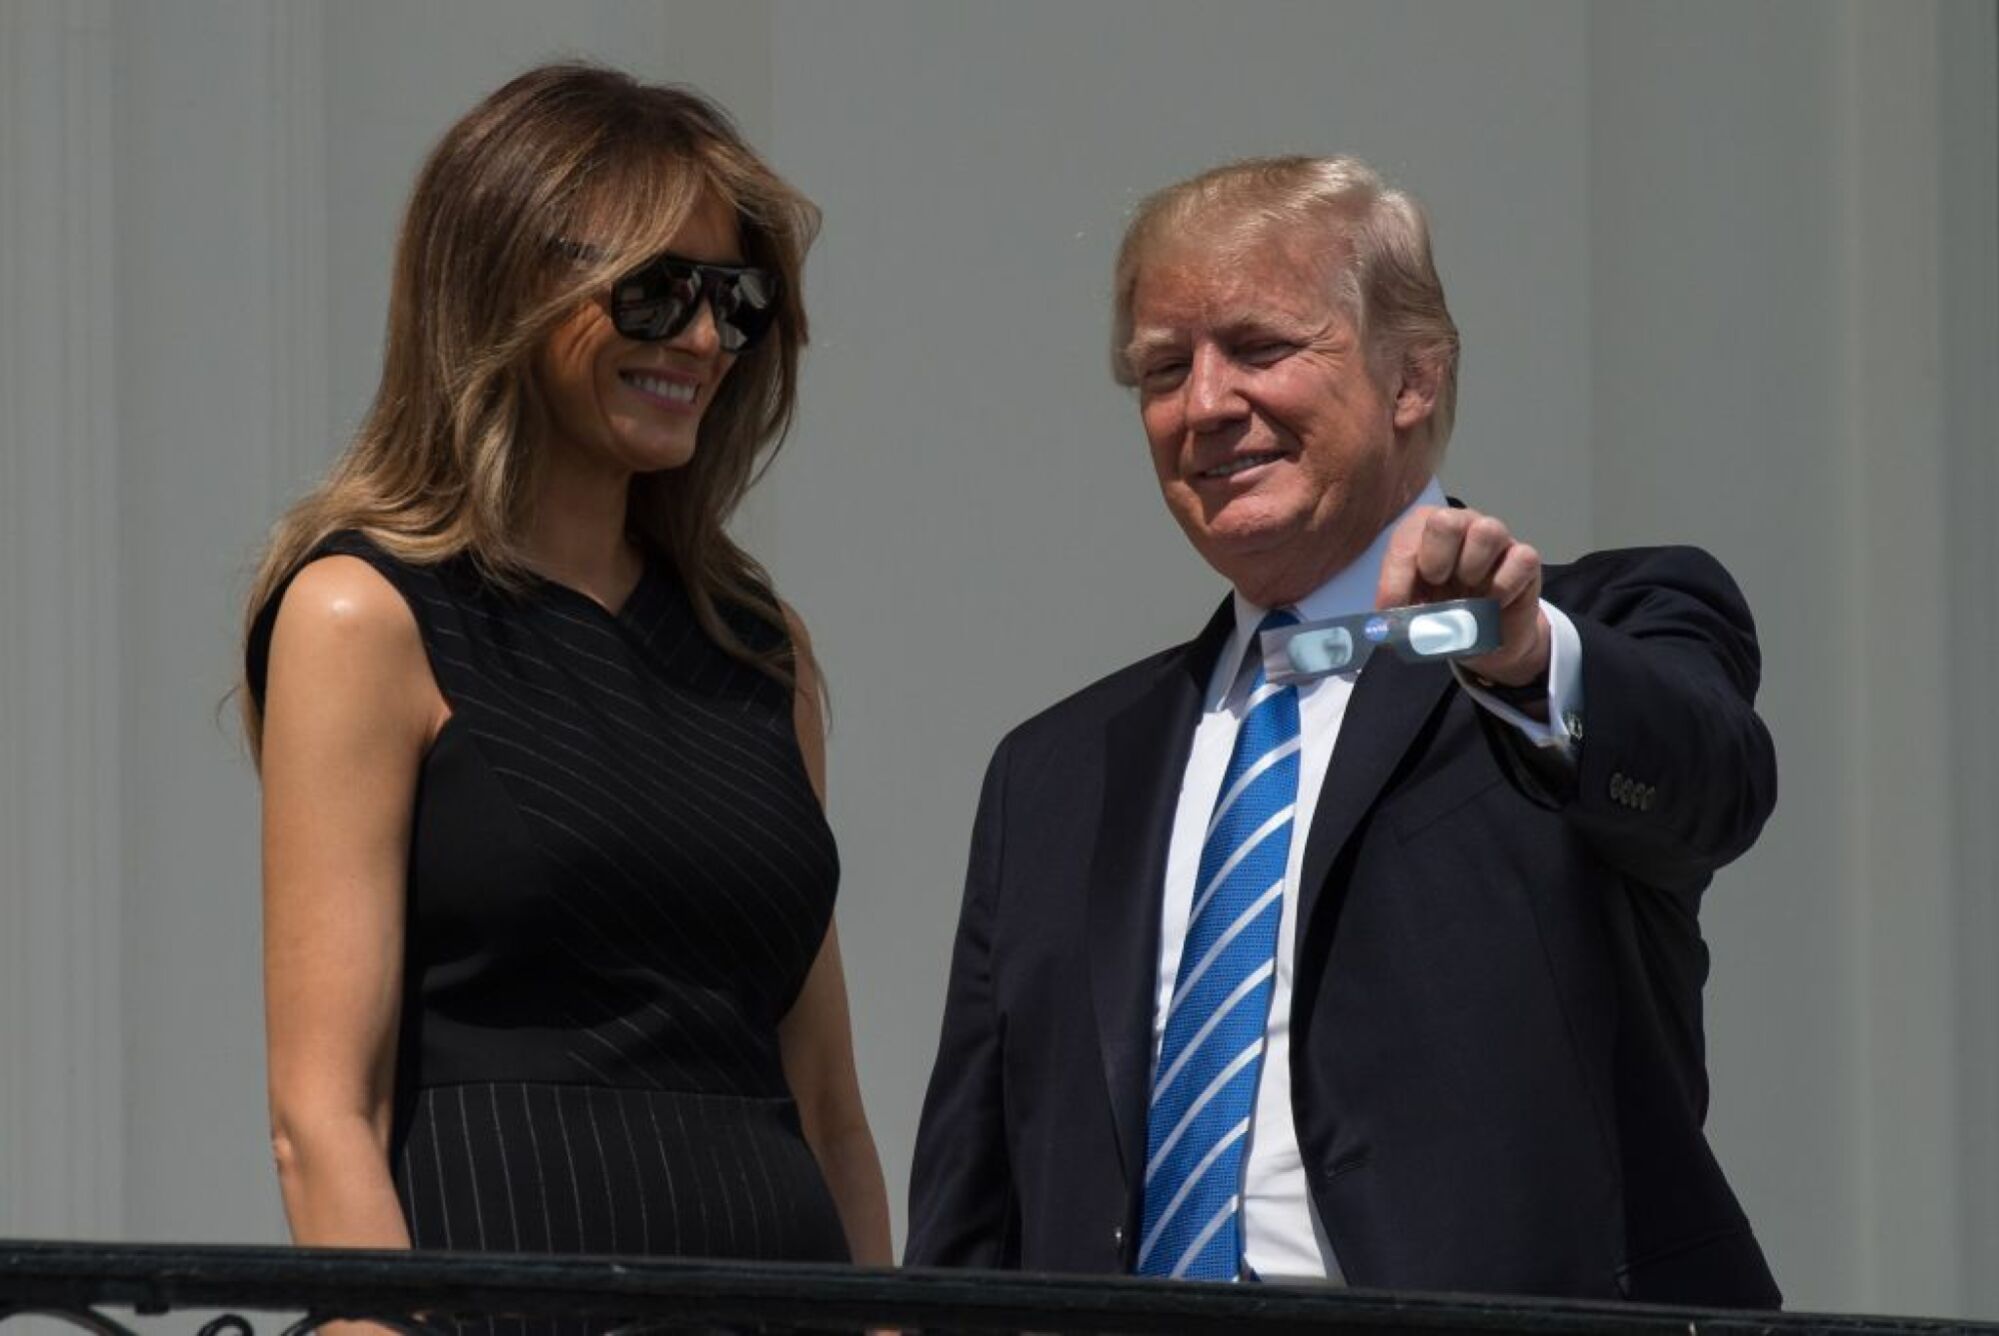 President Donald Trump holding up his eclipse glasses